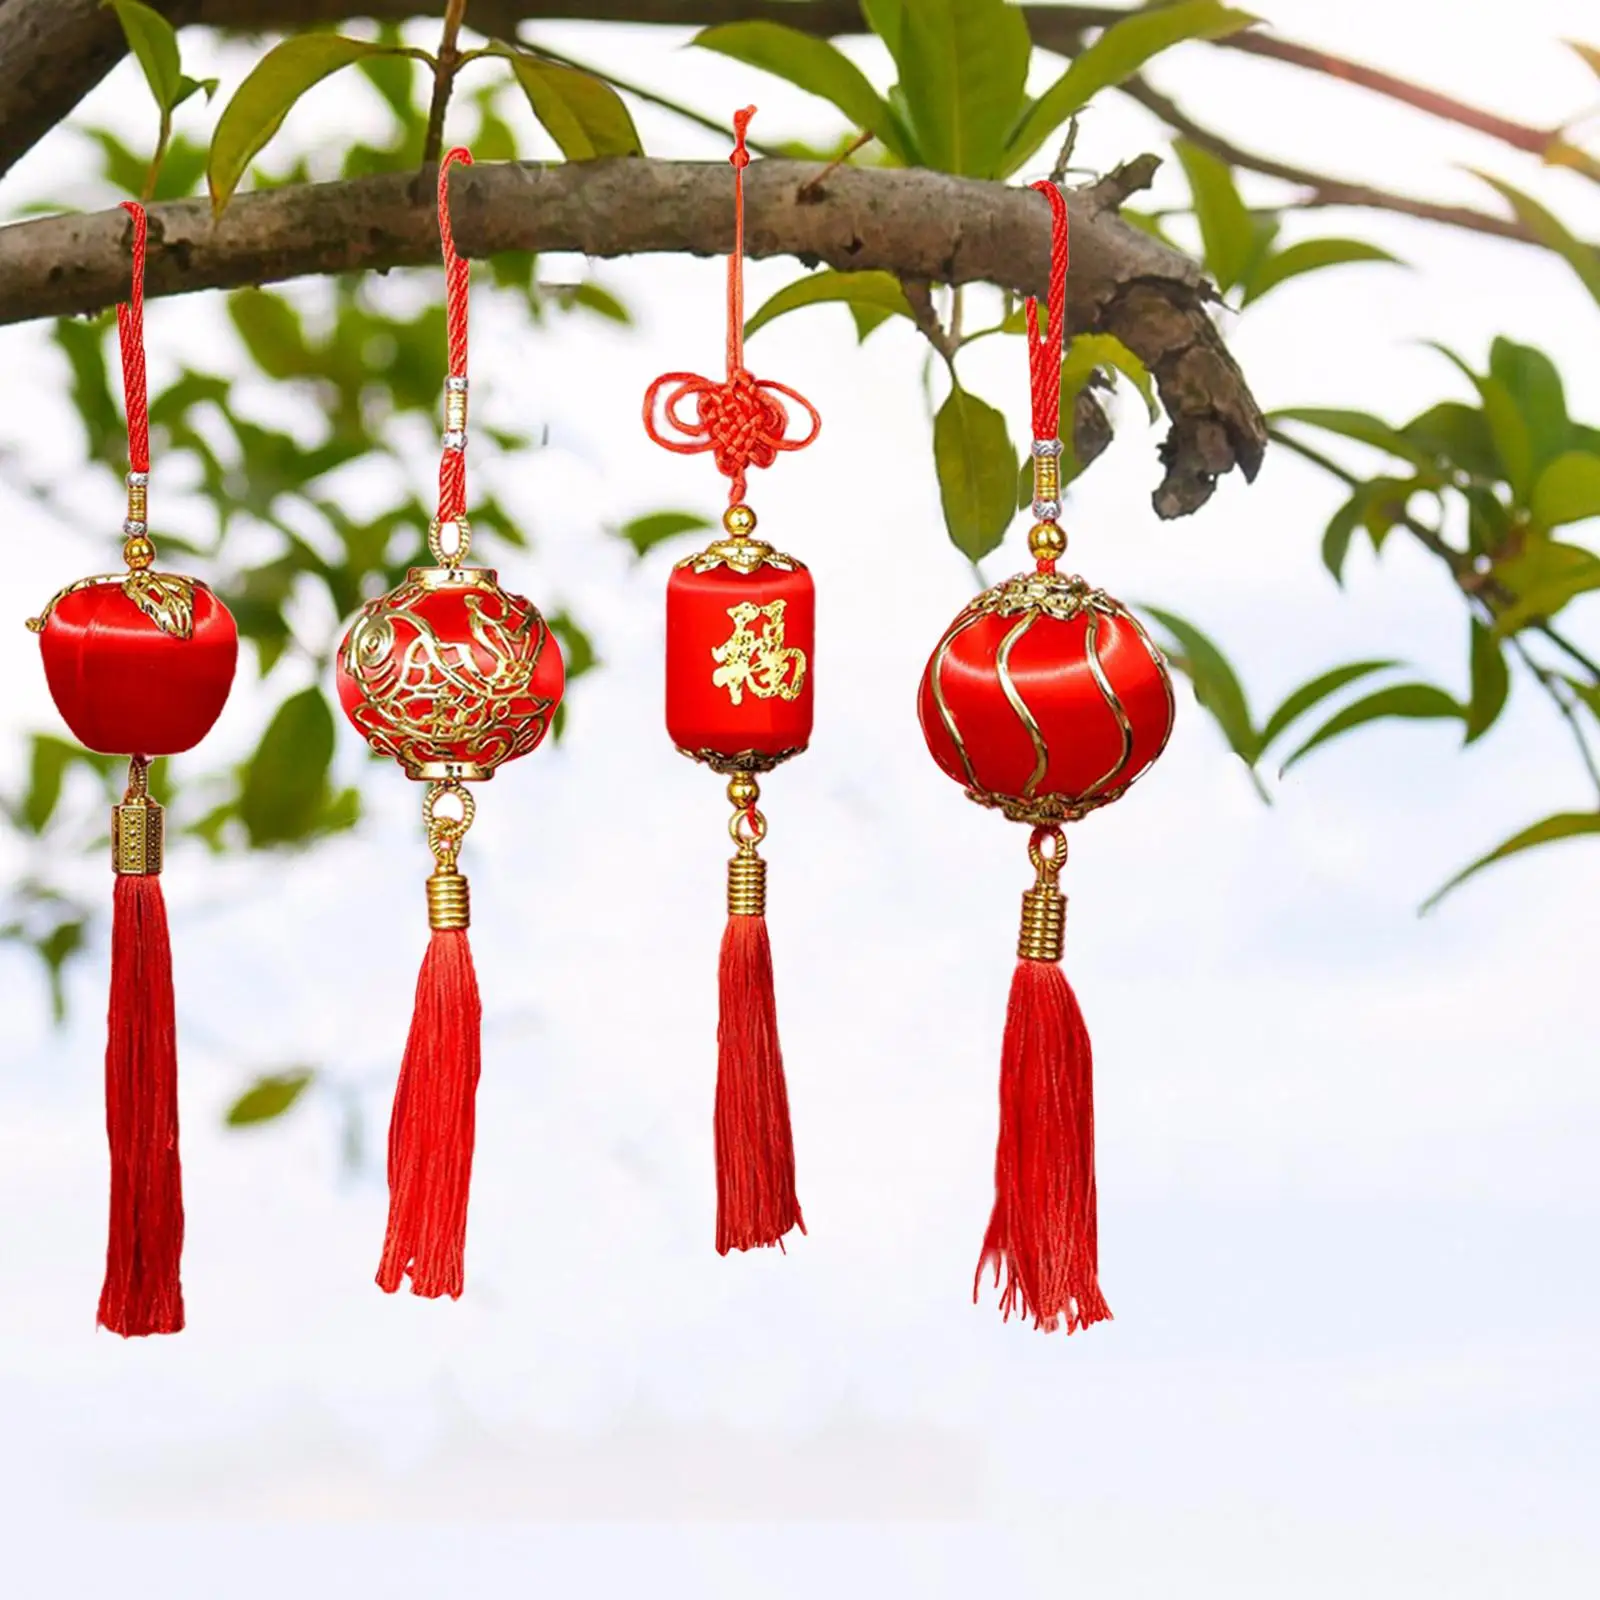 Chinese Red Lantern Traditional Lantern Lunar New Year Spring Festival Hanging Good Luck for Wedding Restaurant Ornament Decor